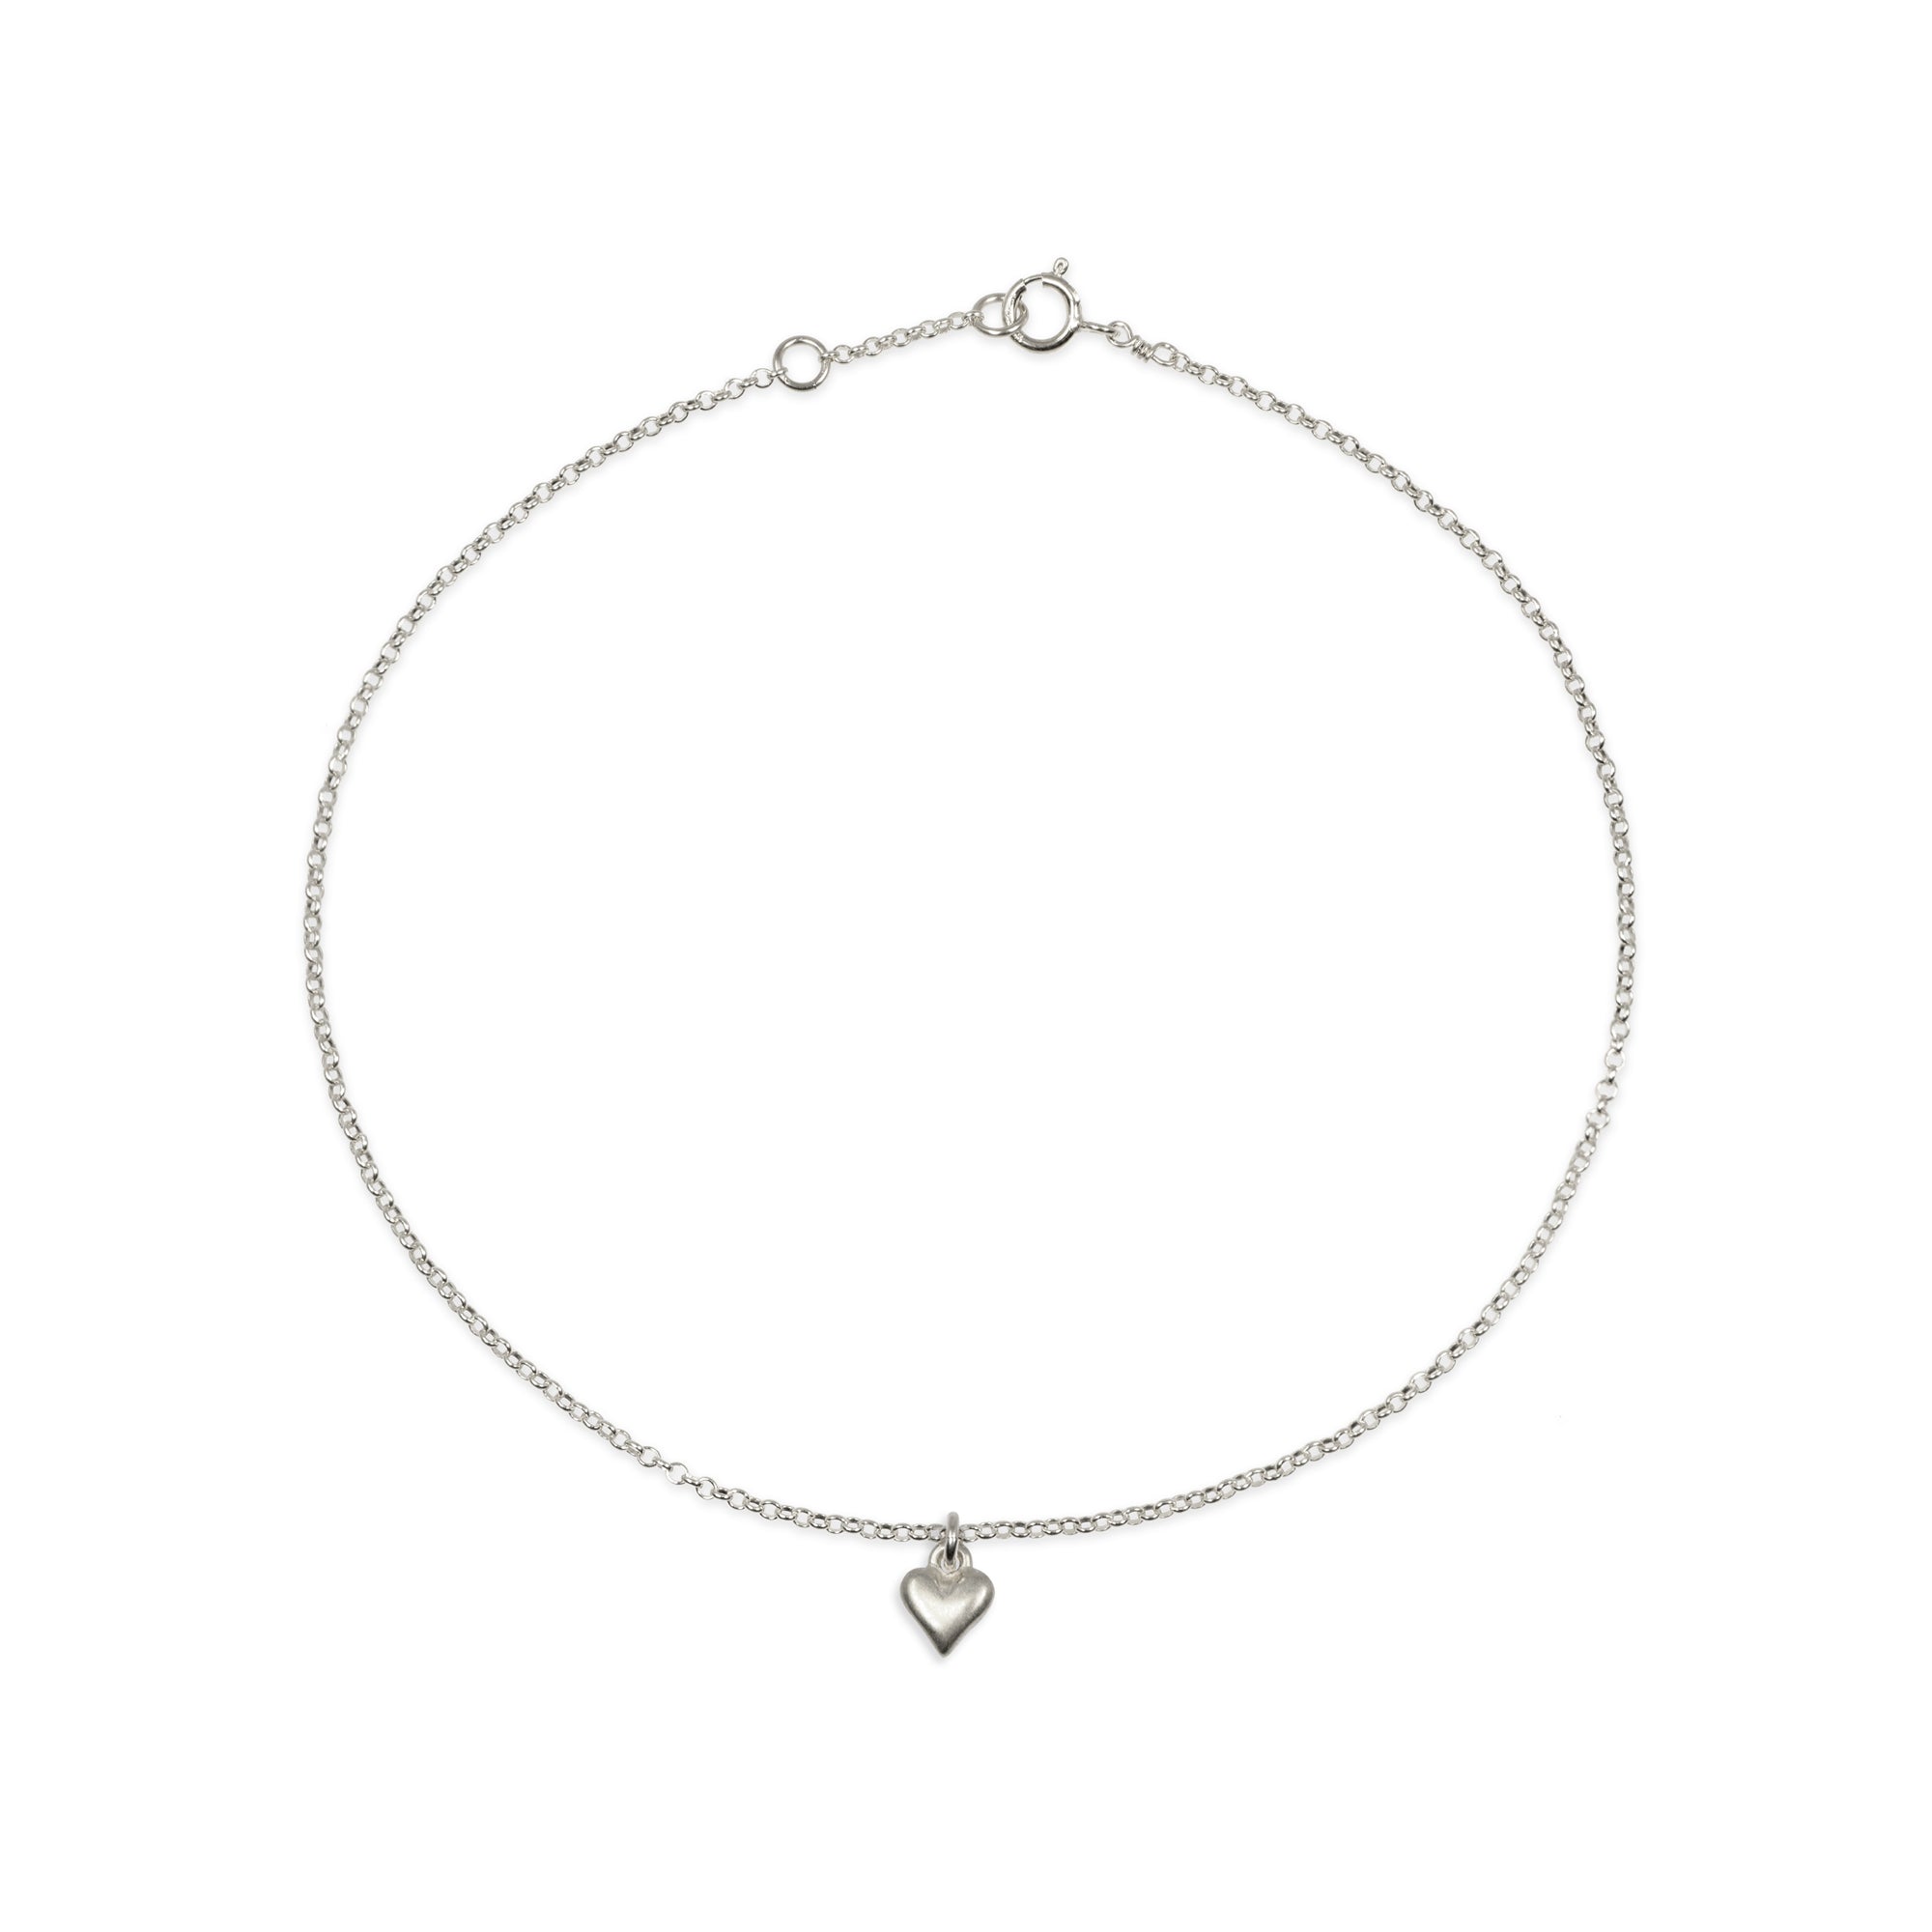 Anklet with tiny heart